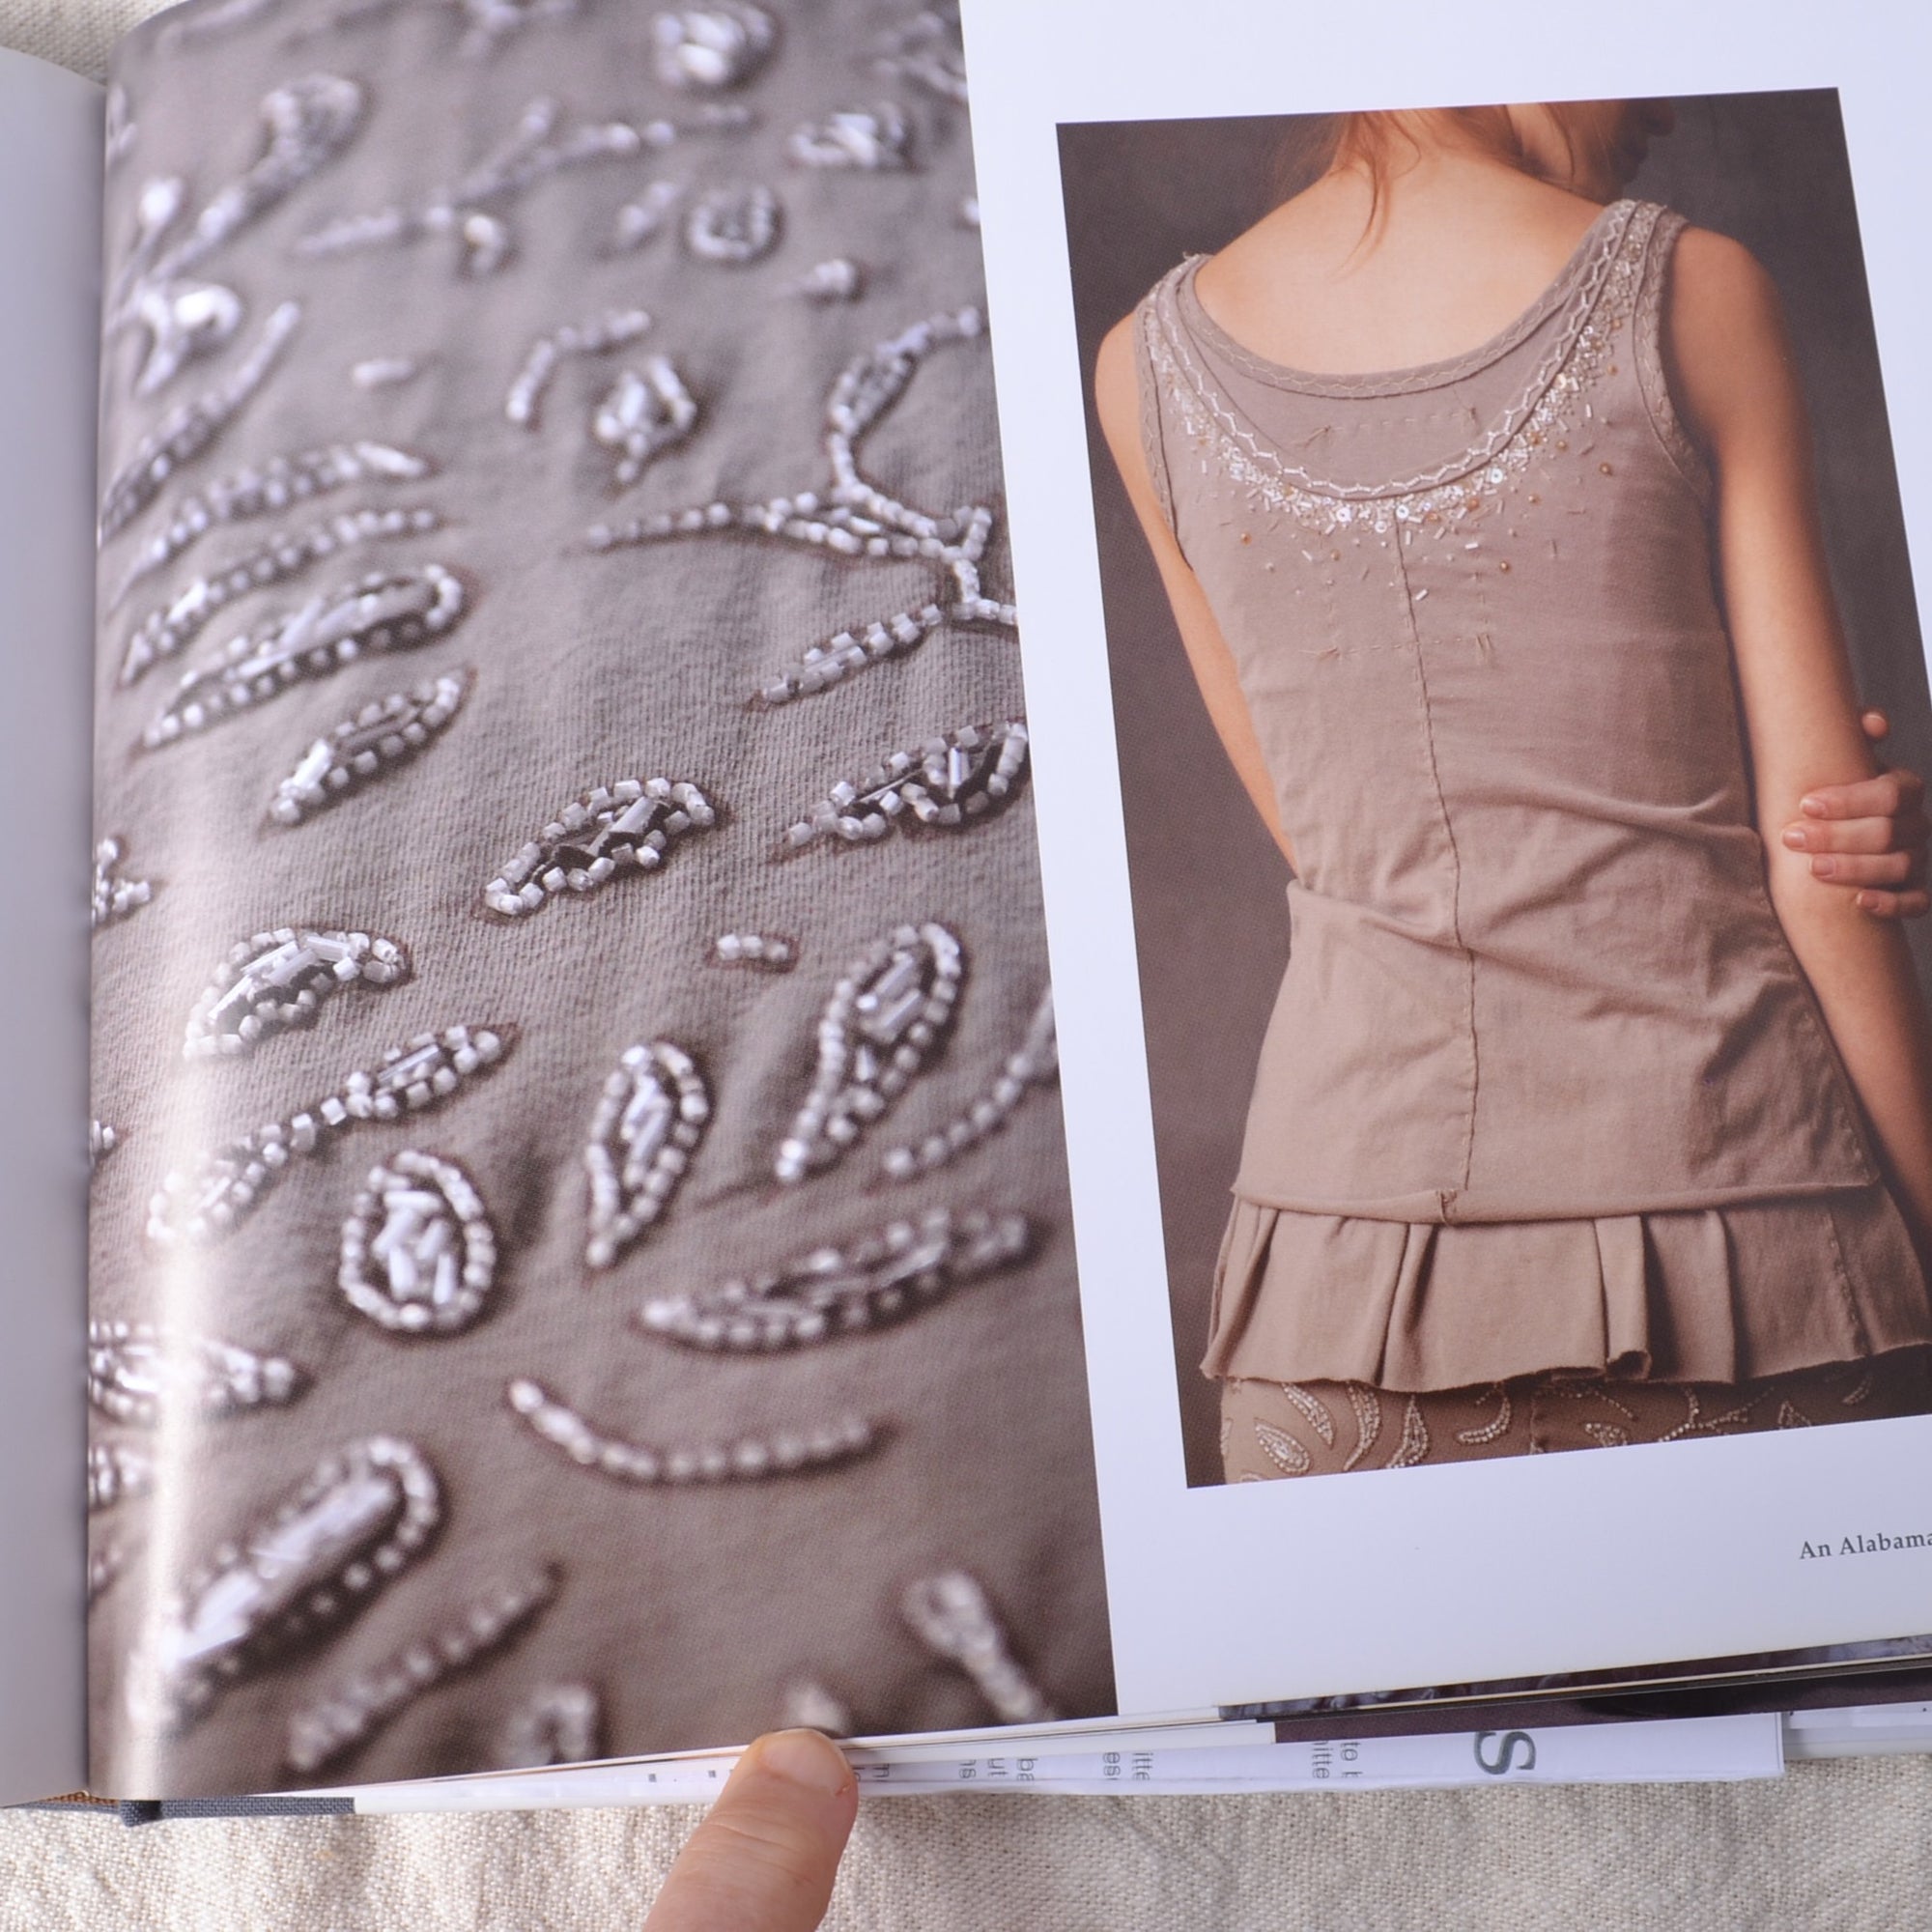 Alabama Studio Sewing & Design, A Guide to Hand-Sewing a Wardrobe